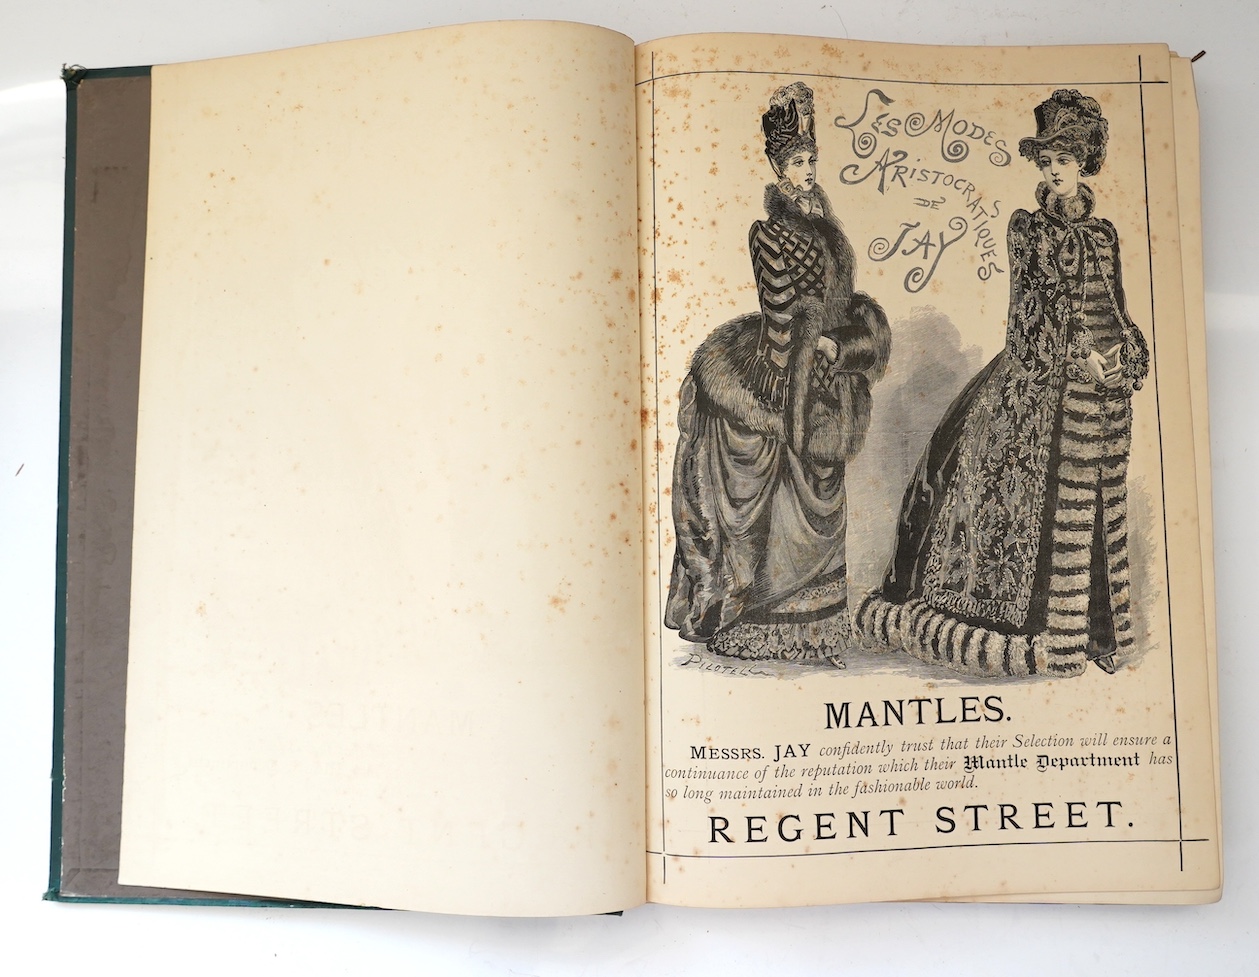 The Vanity Fair Album ... with biographical and critical notices. (Edited) by Jehu Junior (i.e. Thomas Gibson Bowles), vols. XIV, XV & XVI - with 150 (ex.159) chromolithographed plates (by 'Spy', i.e. Leslie Ward, 'Ape'